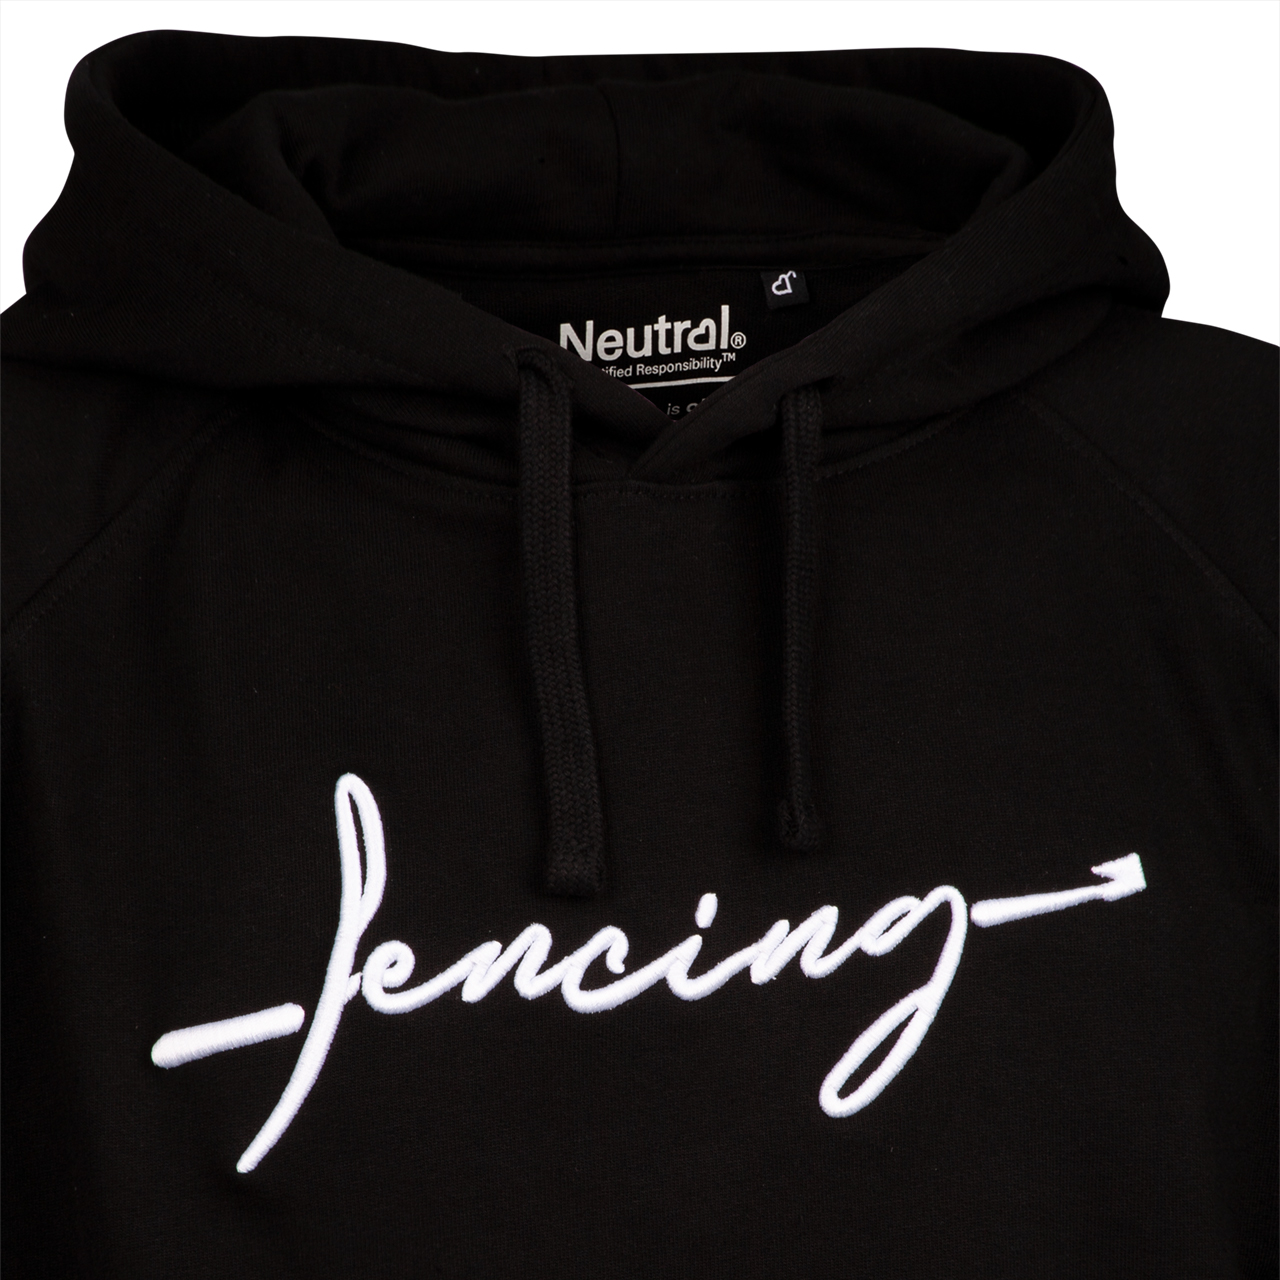 hoodie with "Fencing" embroidery